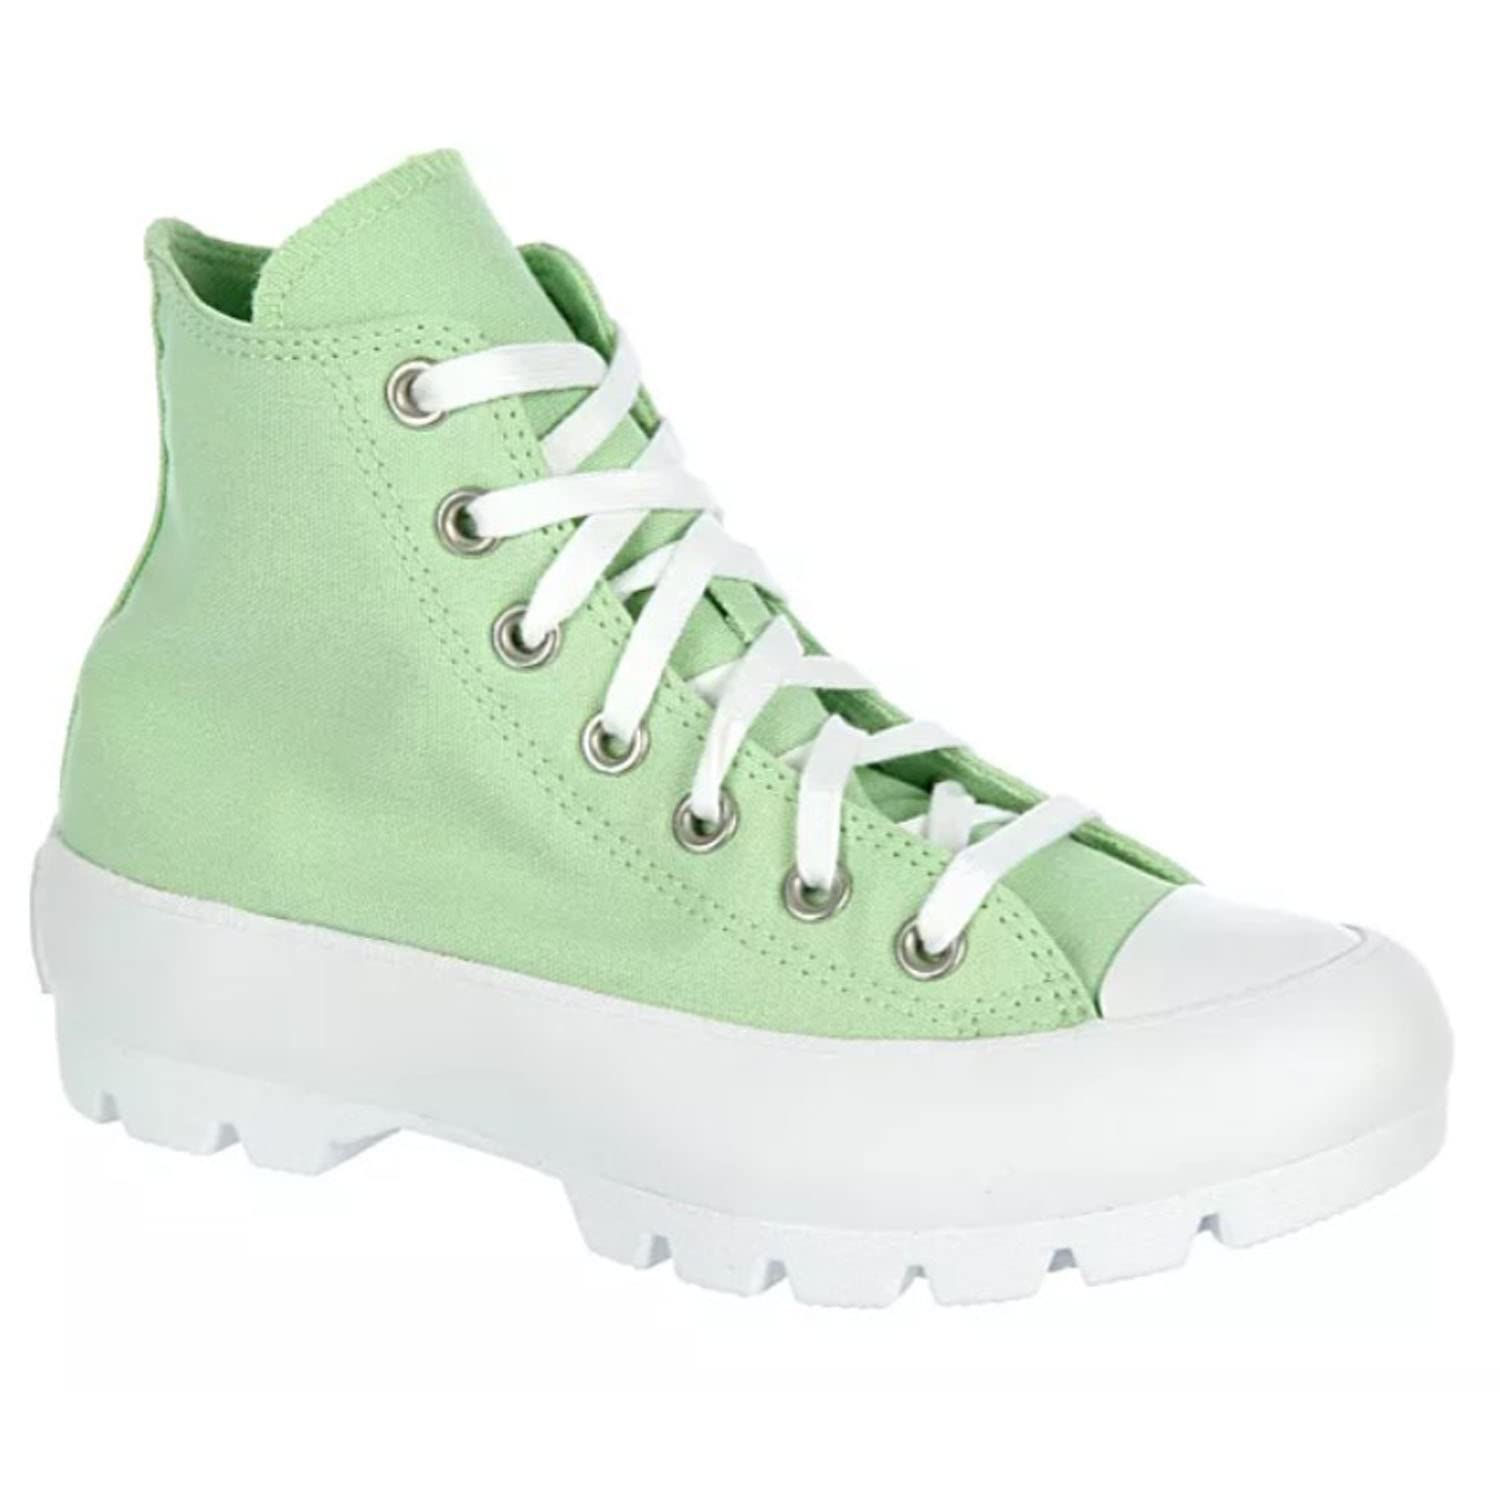 Converse Unisex Chuck Taylor All Star Lugged High Canvas Sneaker - Lace up Closure Style - Neon Mint/White/Black